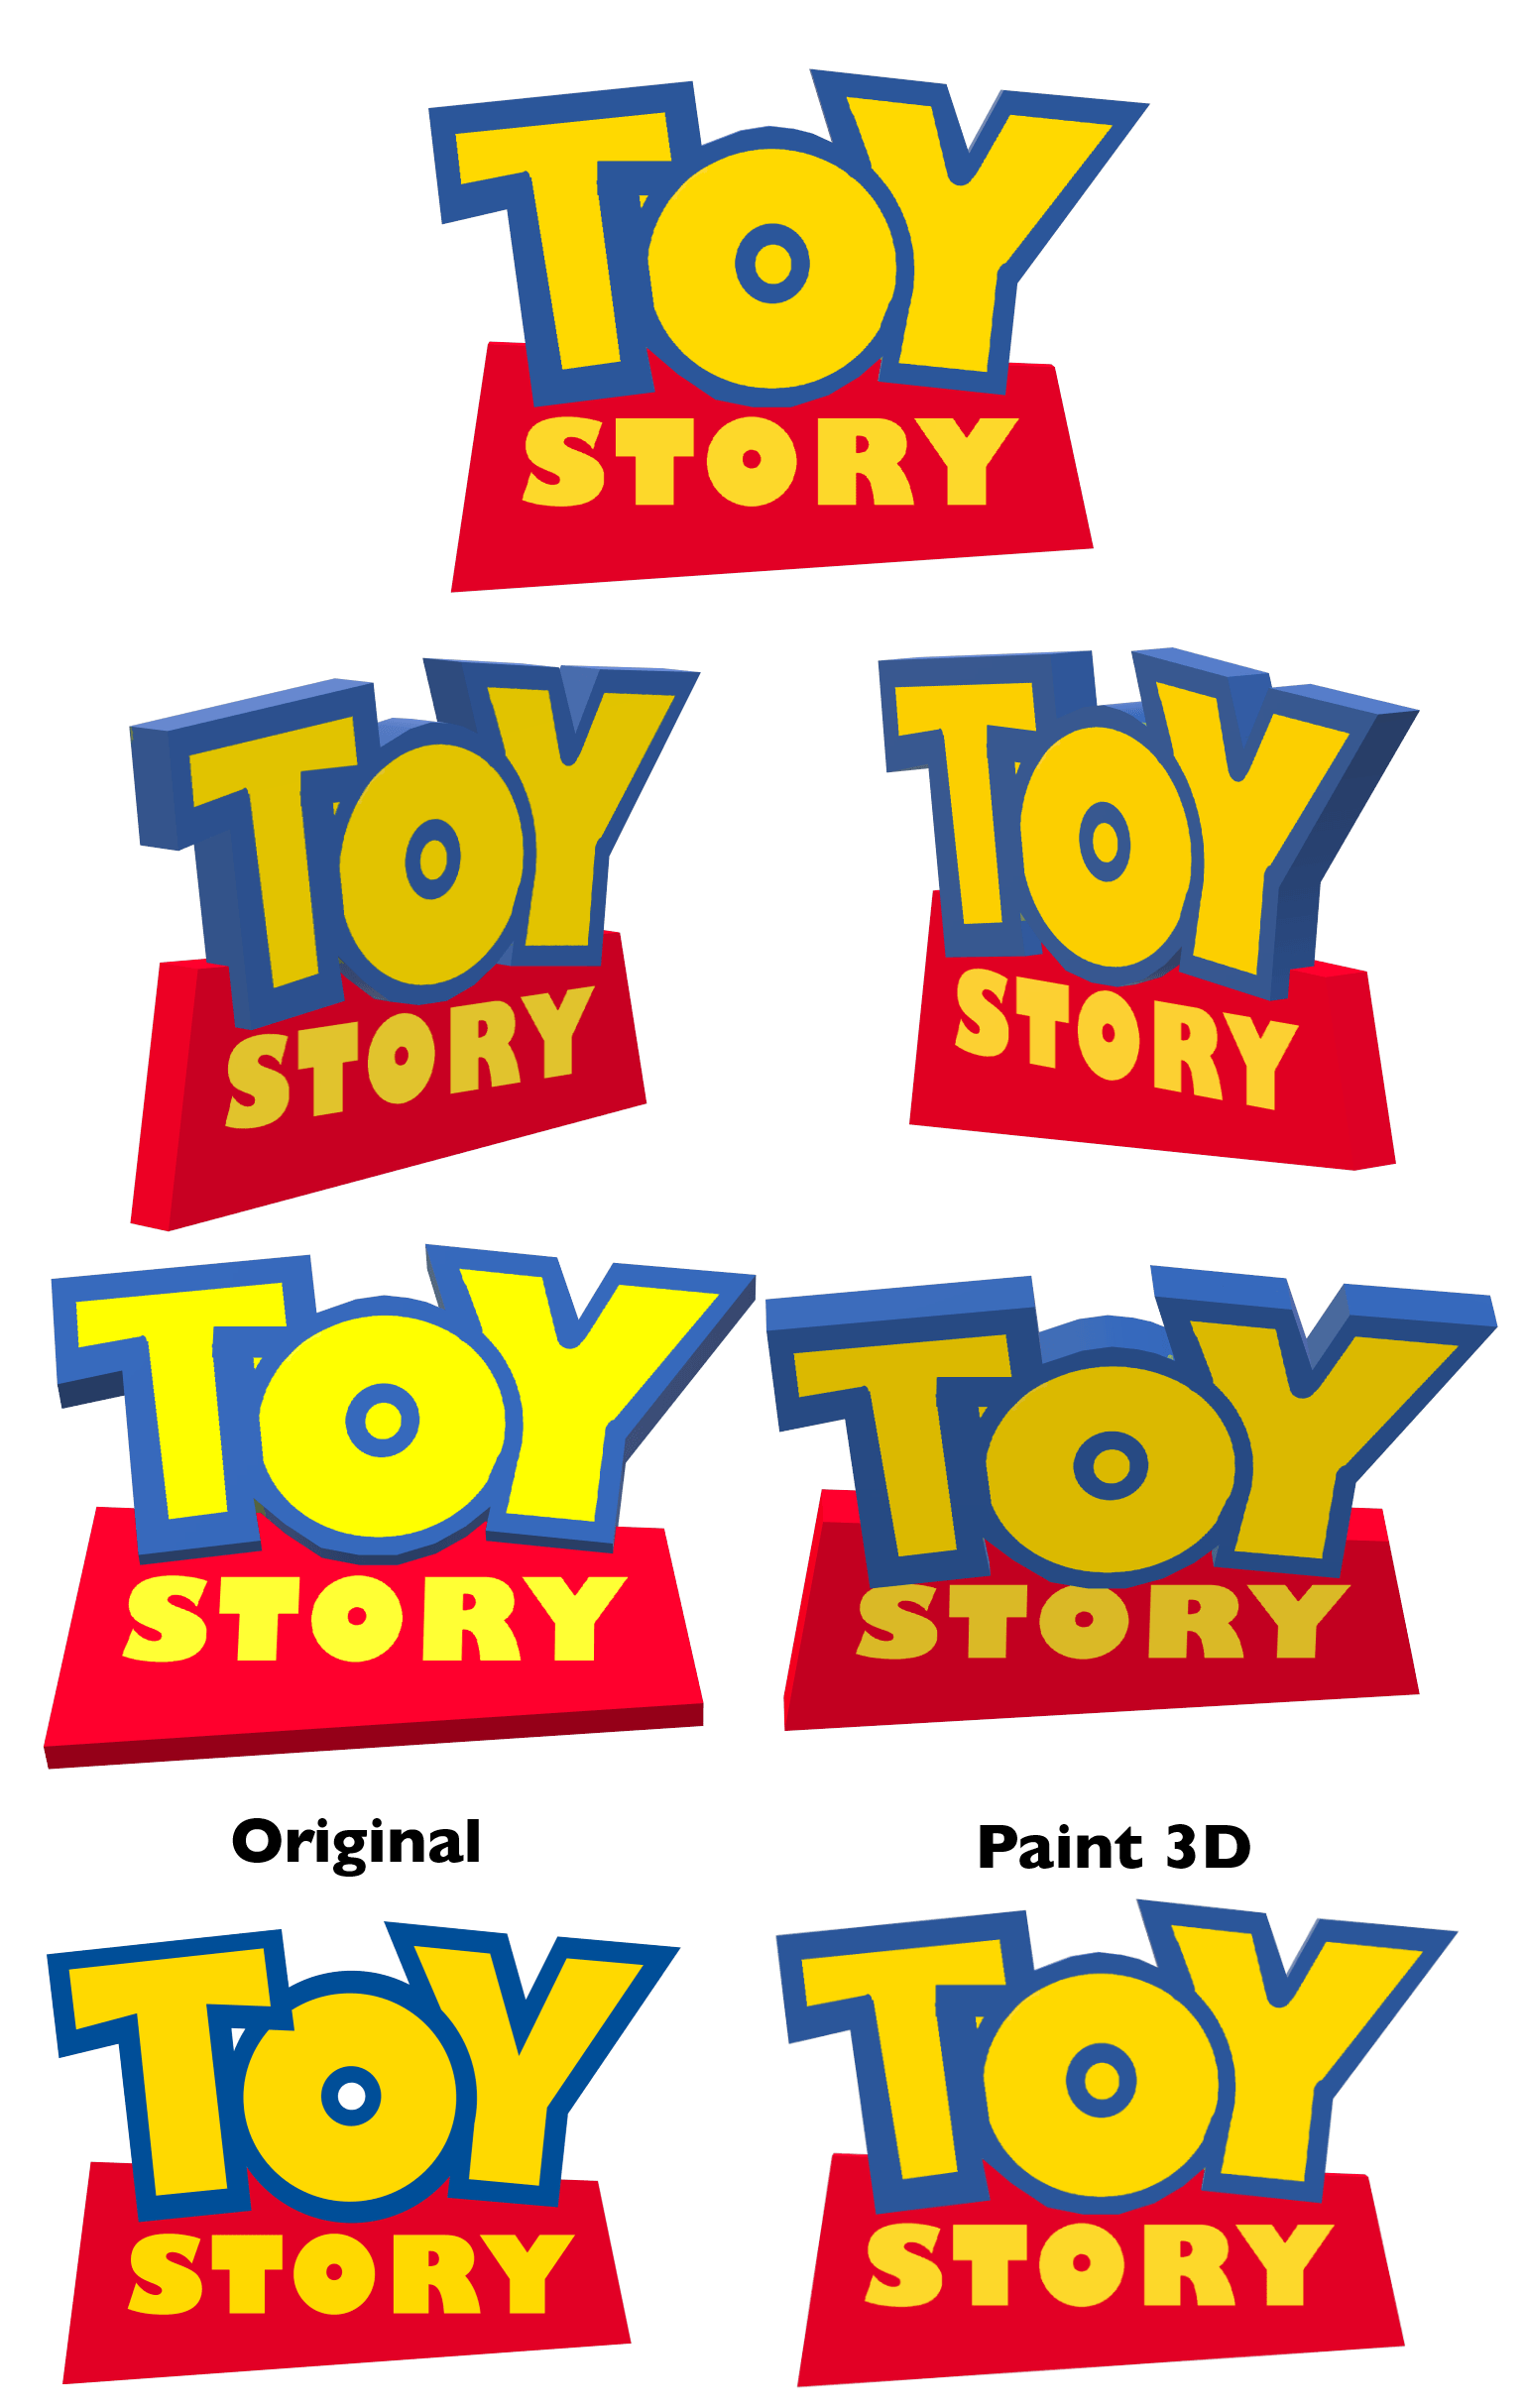 Story Logo - I recreated the Toy Story logo in Paint 3D : toystory